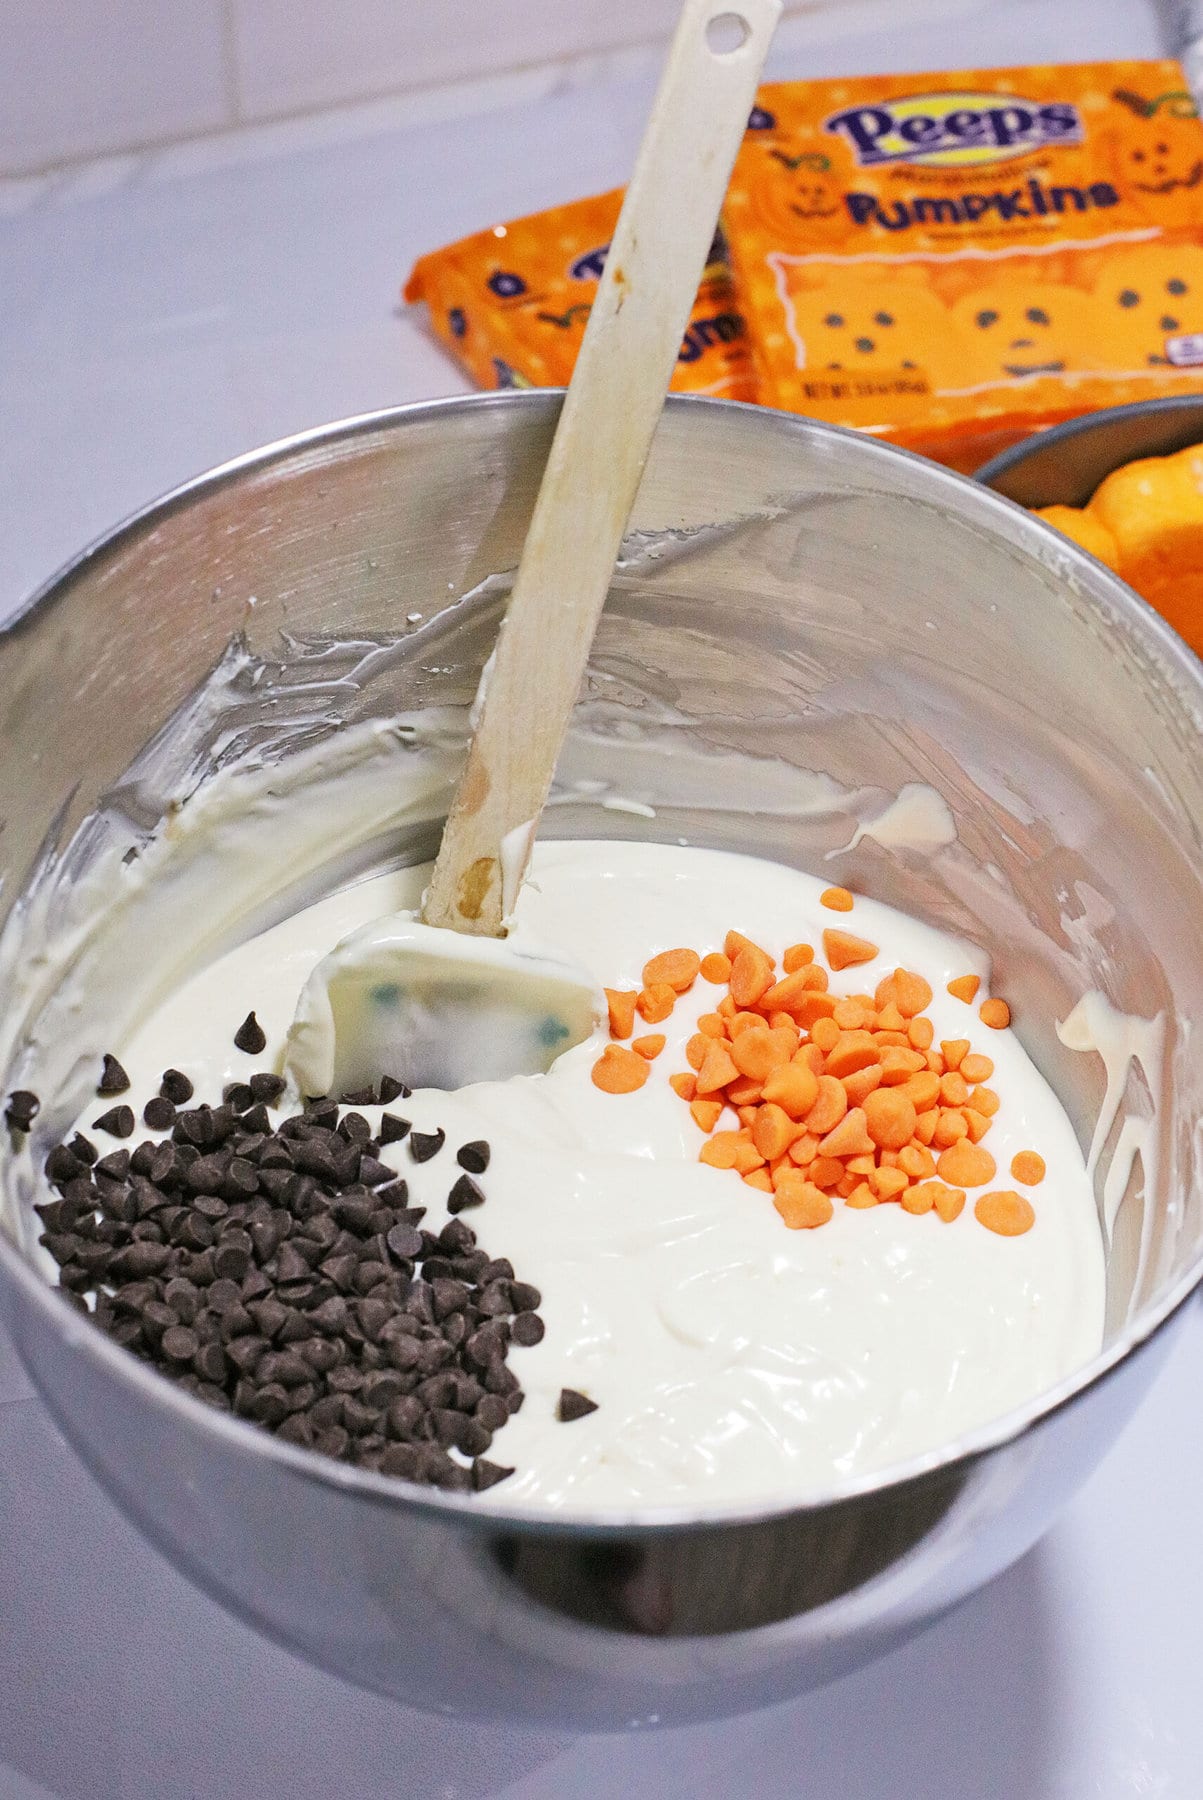 Adding the chocolate chips into the batter.